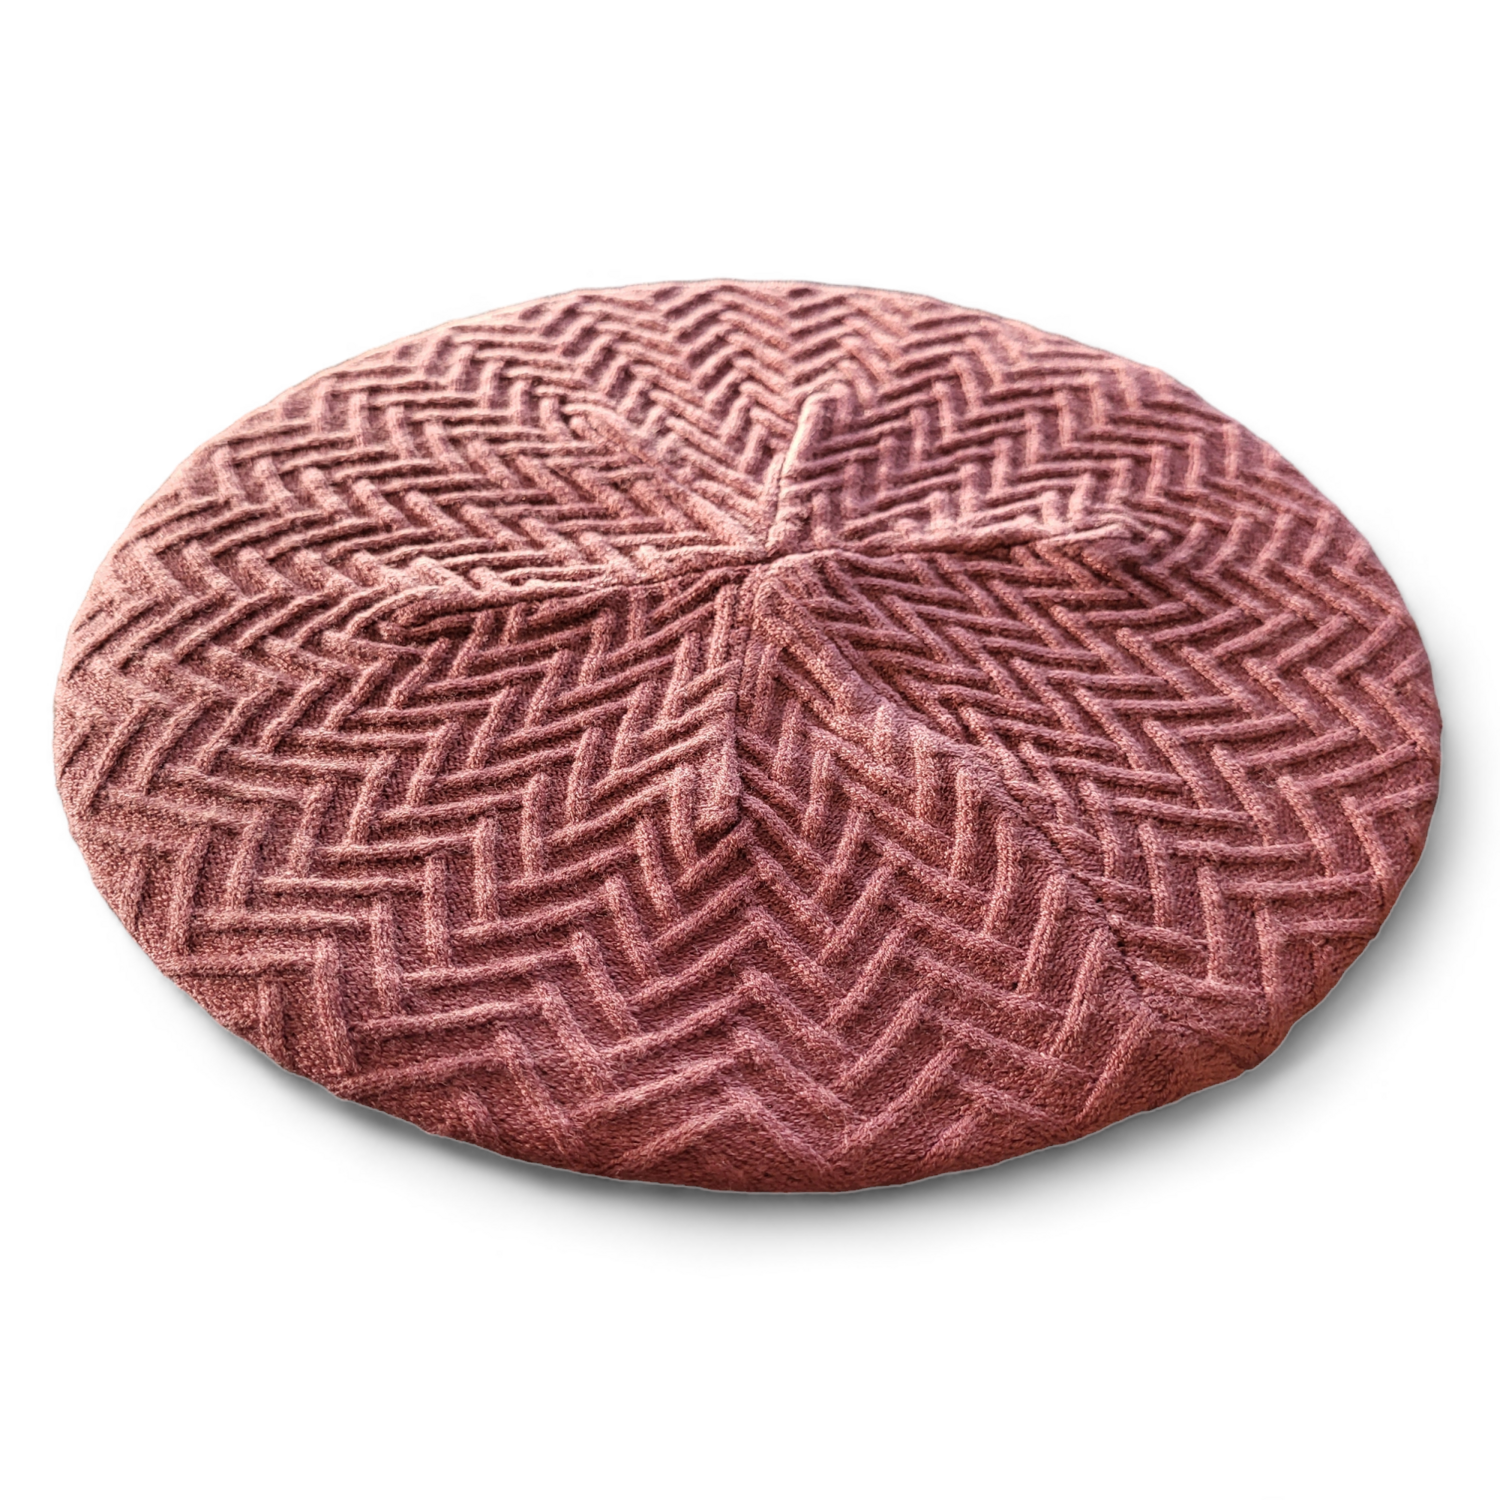 Dusty rose - chevron patterned snood